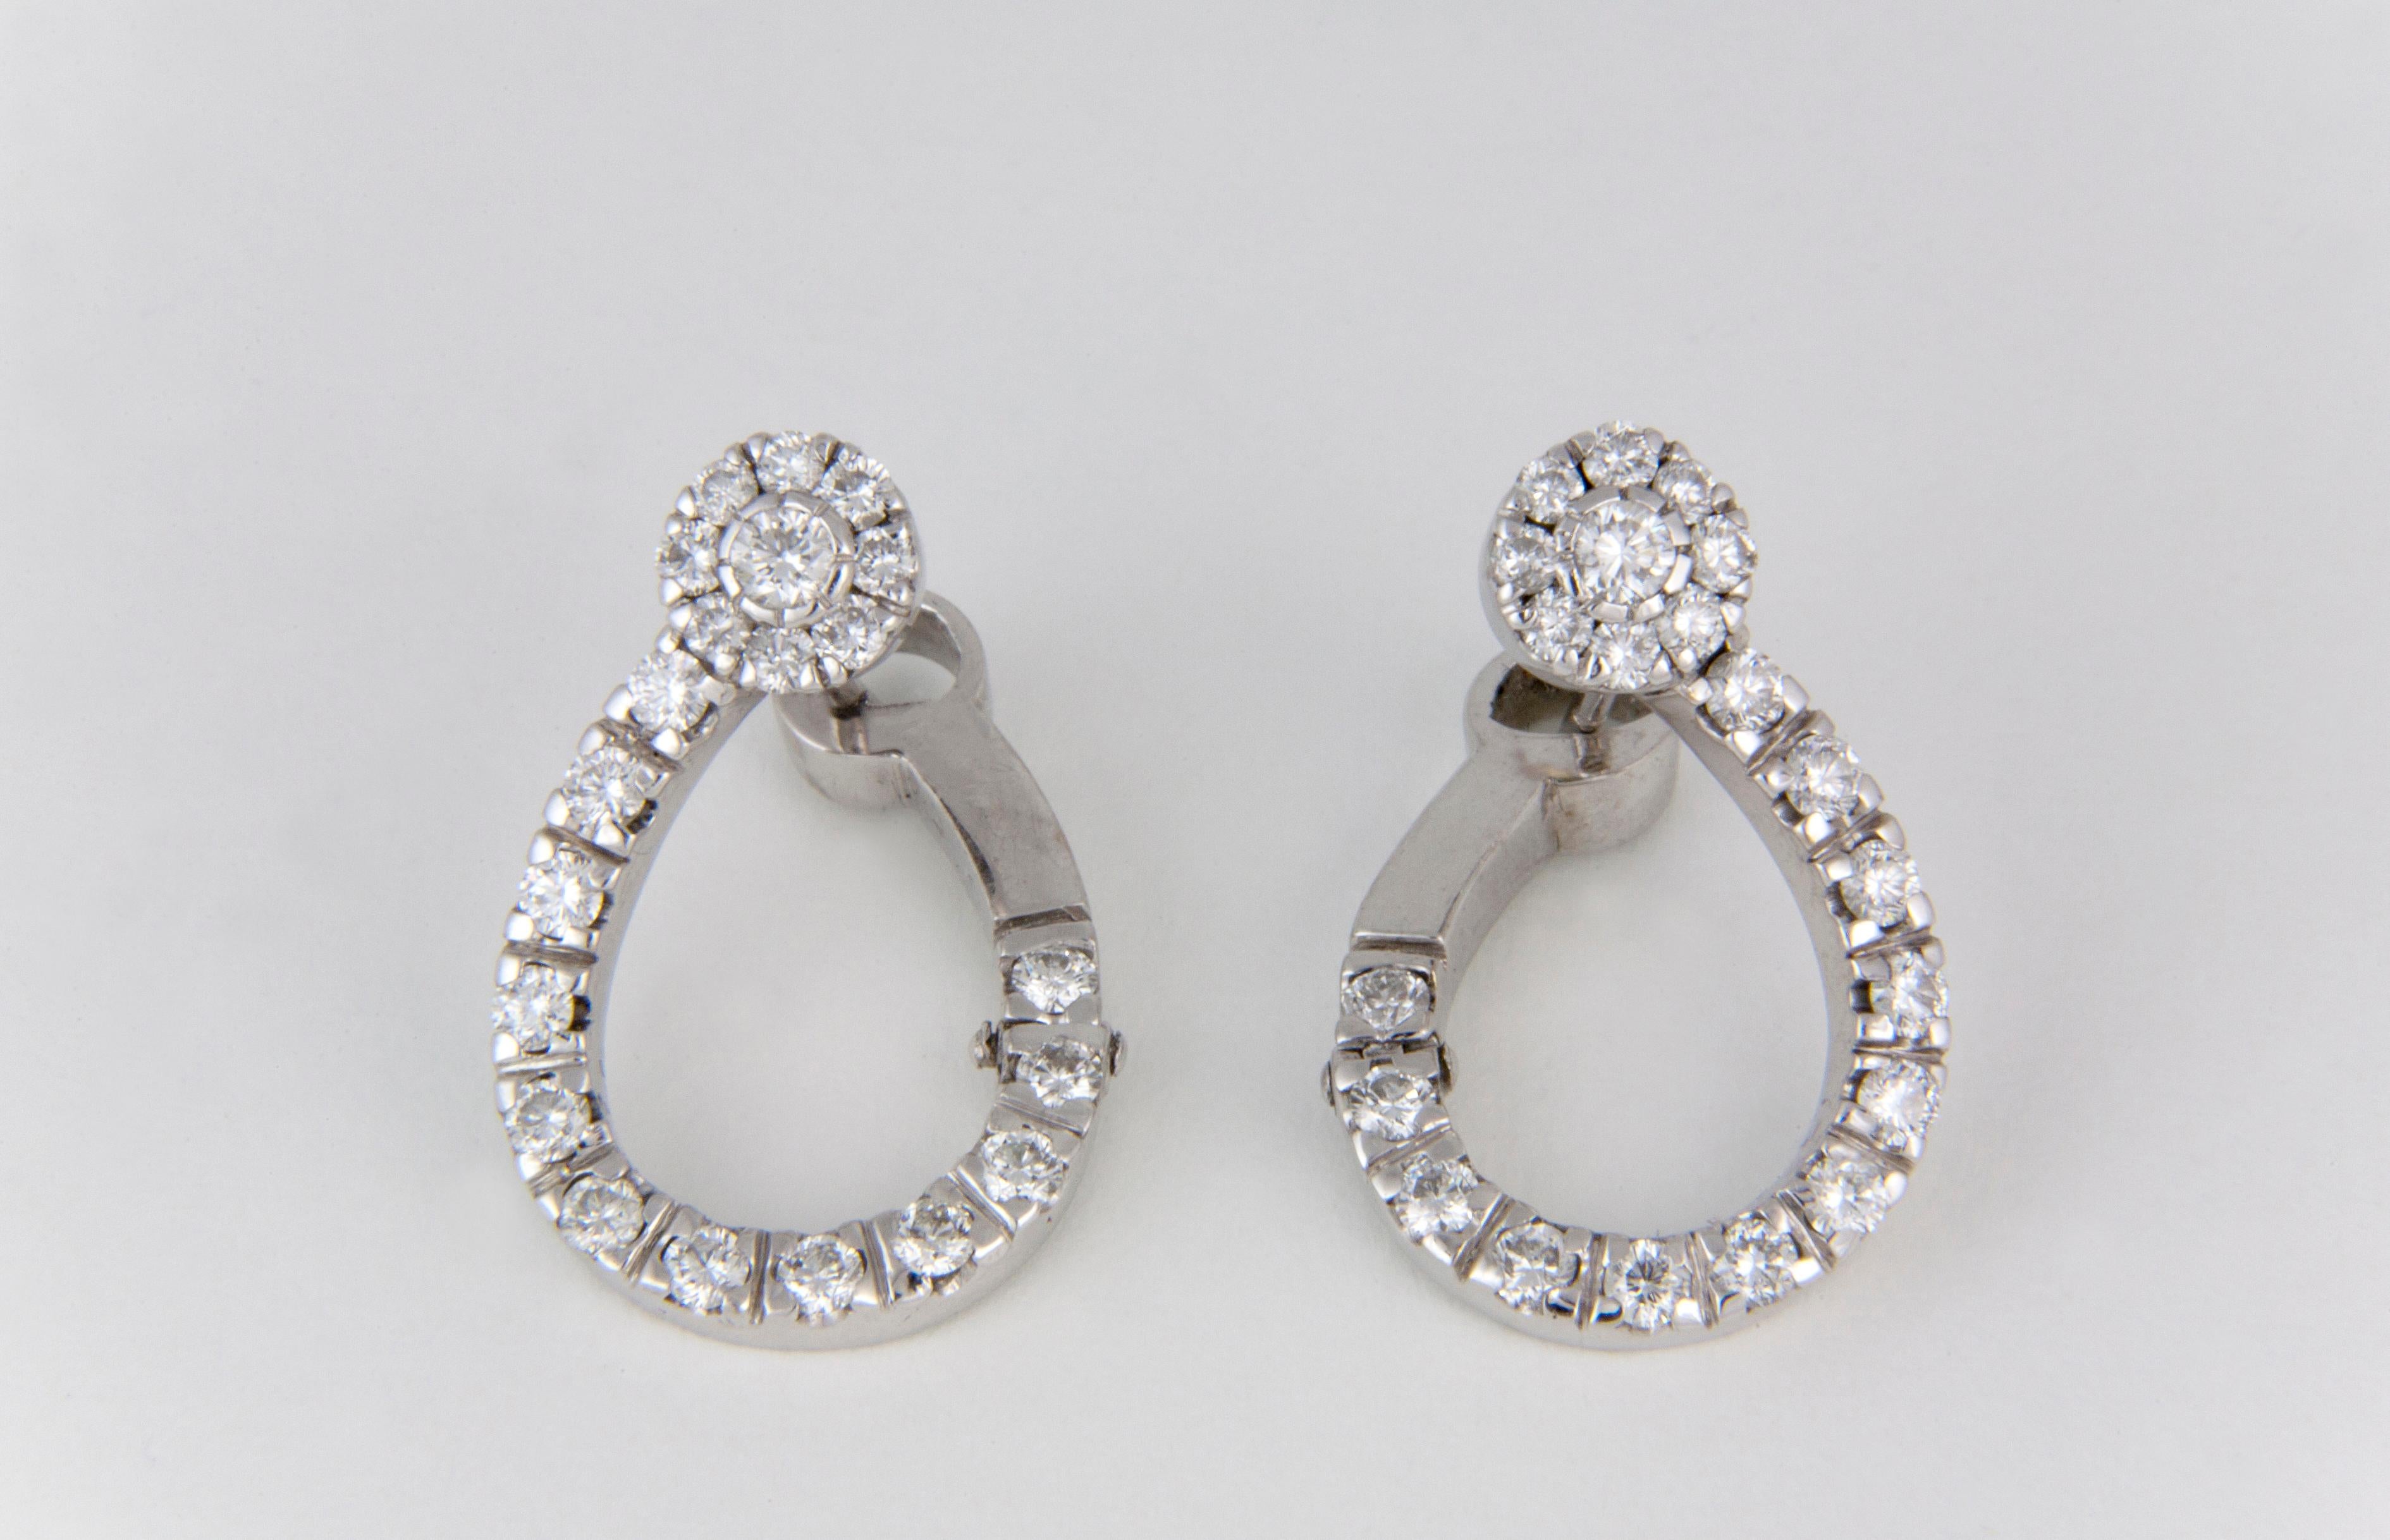 Extremely flattering and very elegant pair of earrings with 1,65 ct diamonds in 18 K White Gold

HRD Certificates can be issued upon request.  
Additional price and delivery will be given prior to client’s purchase. In this case, each piece will be